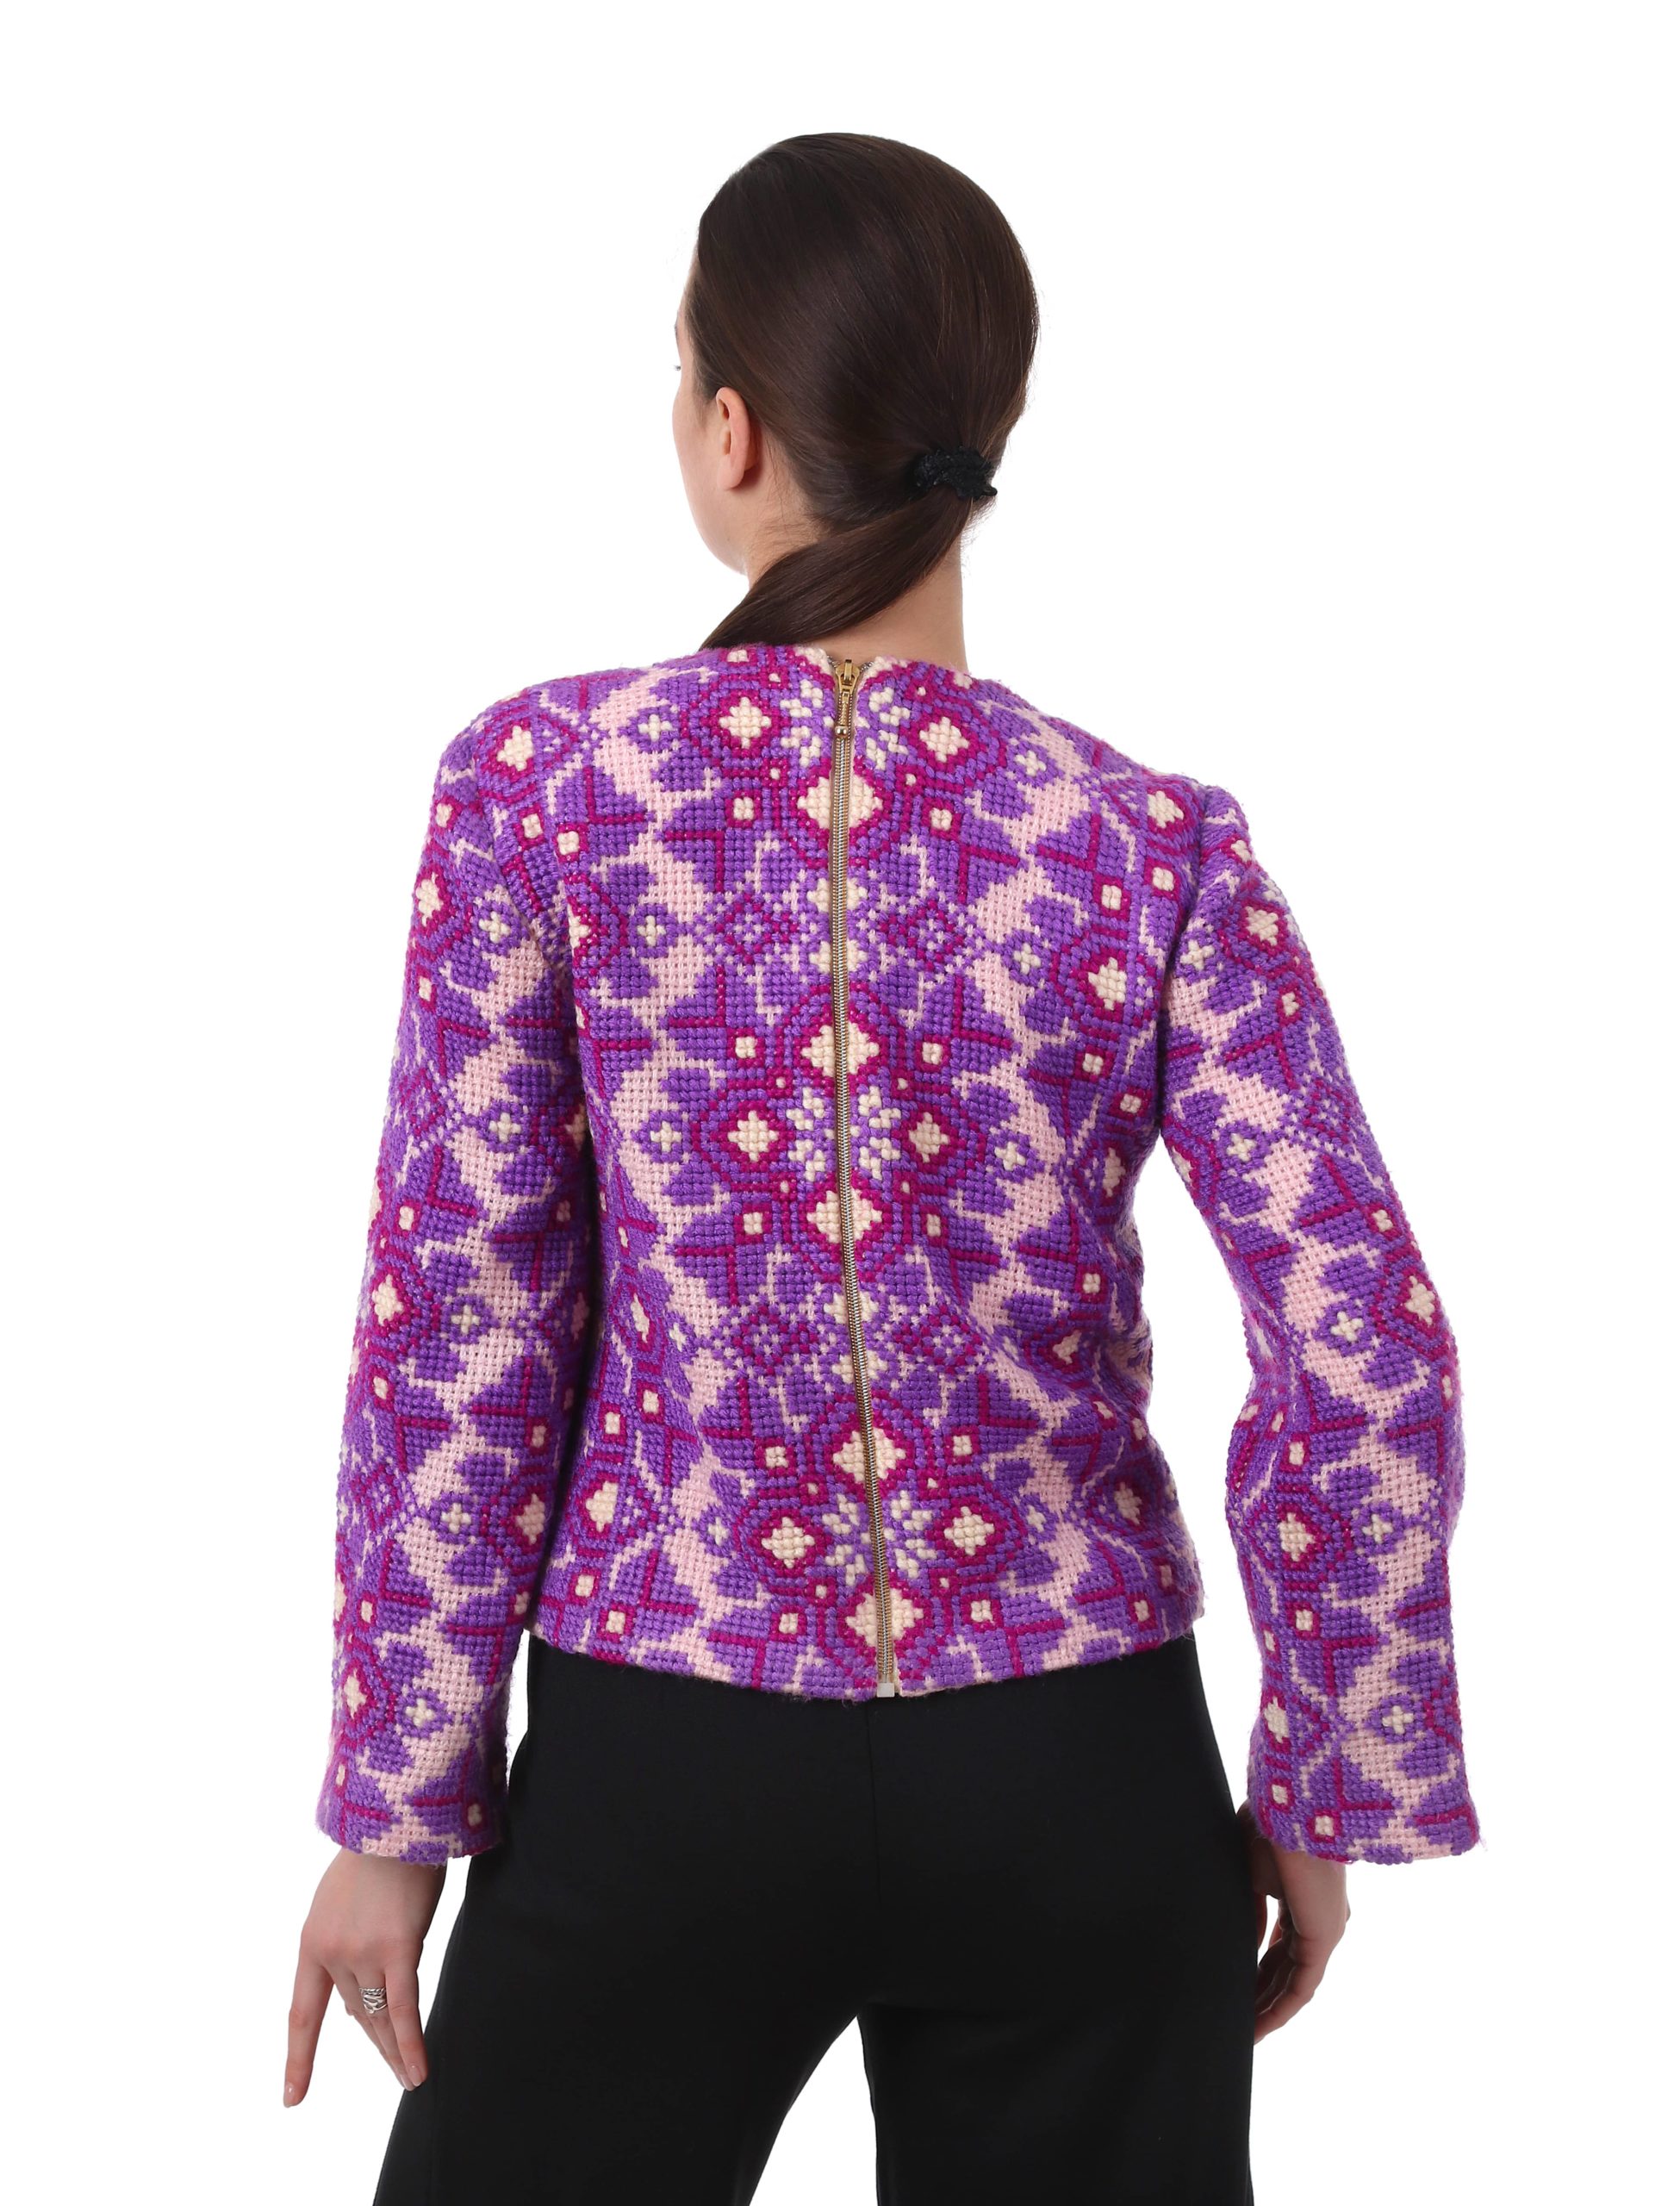 Embroidered jacket 